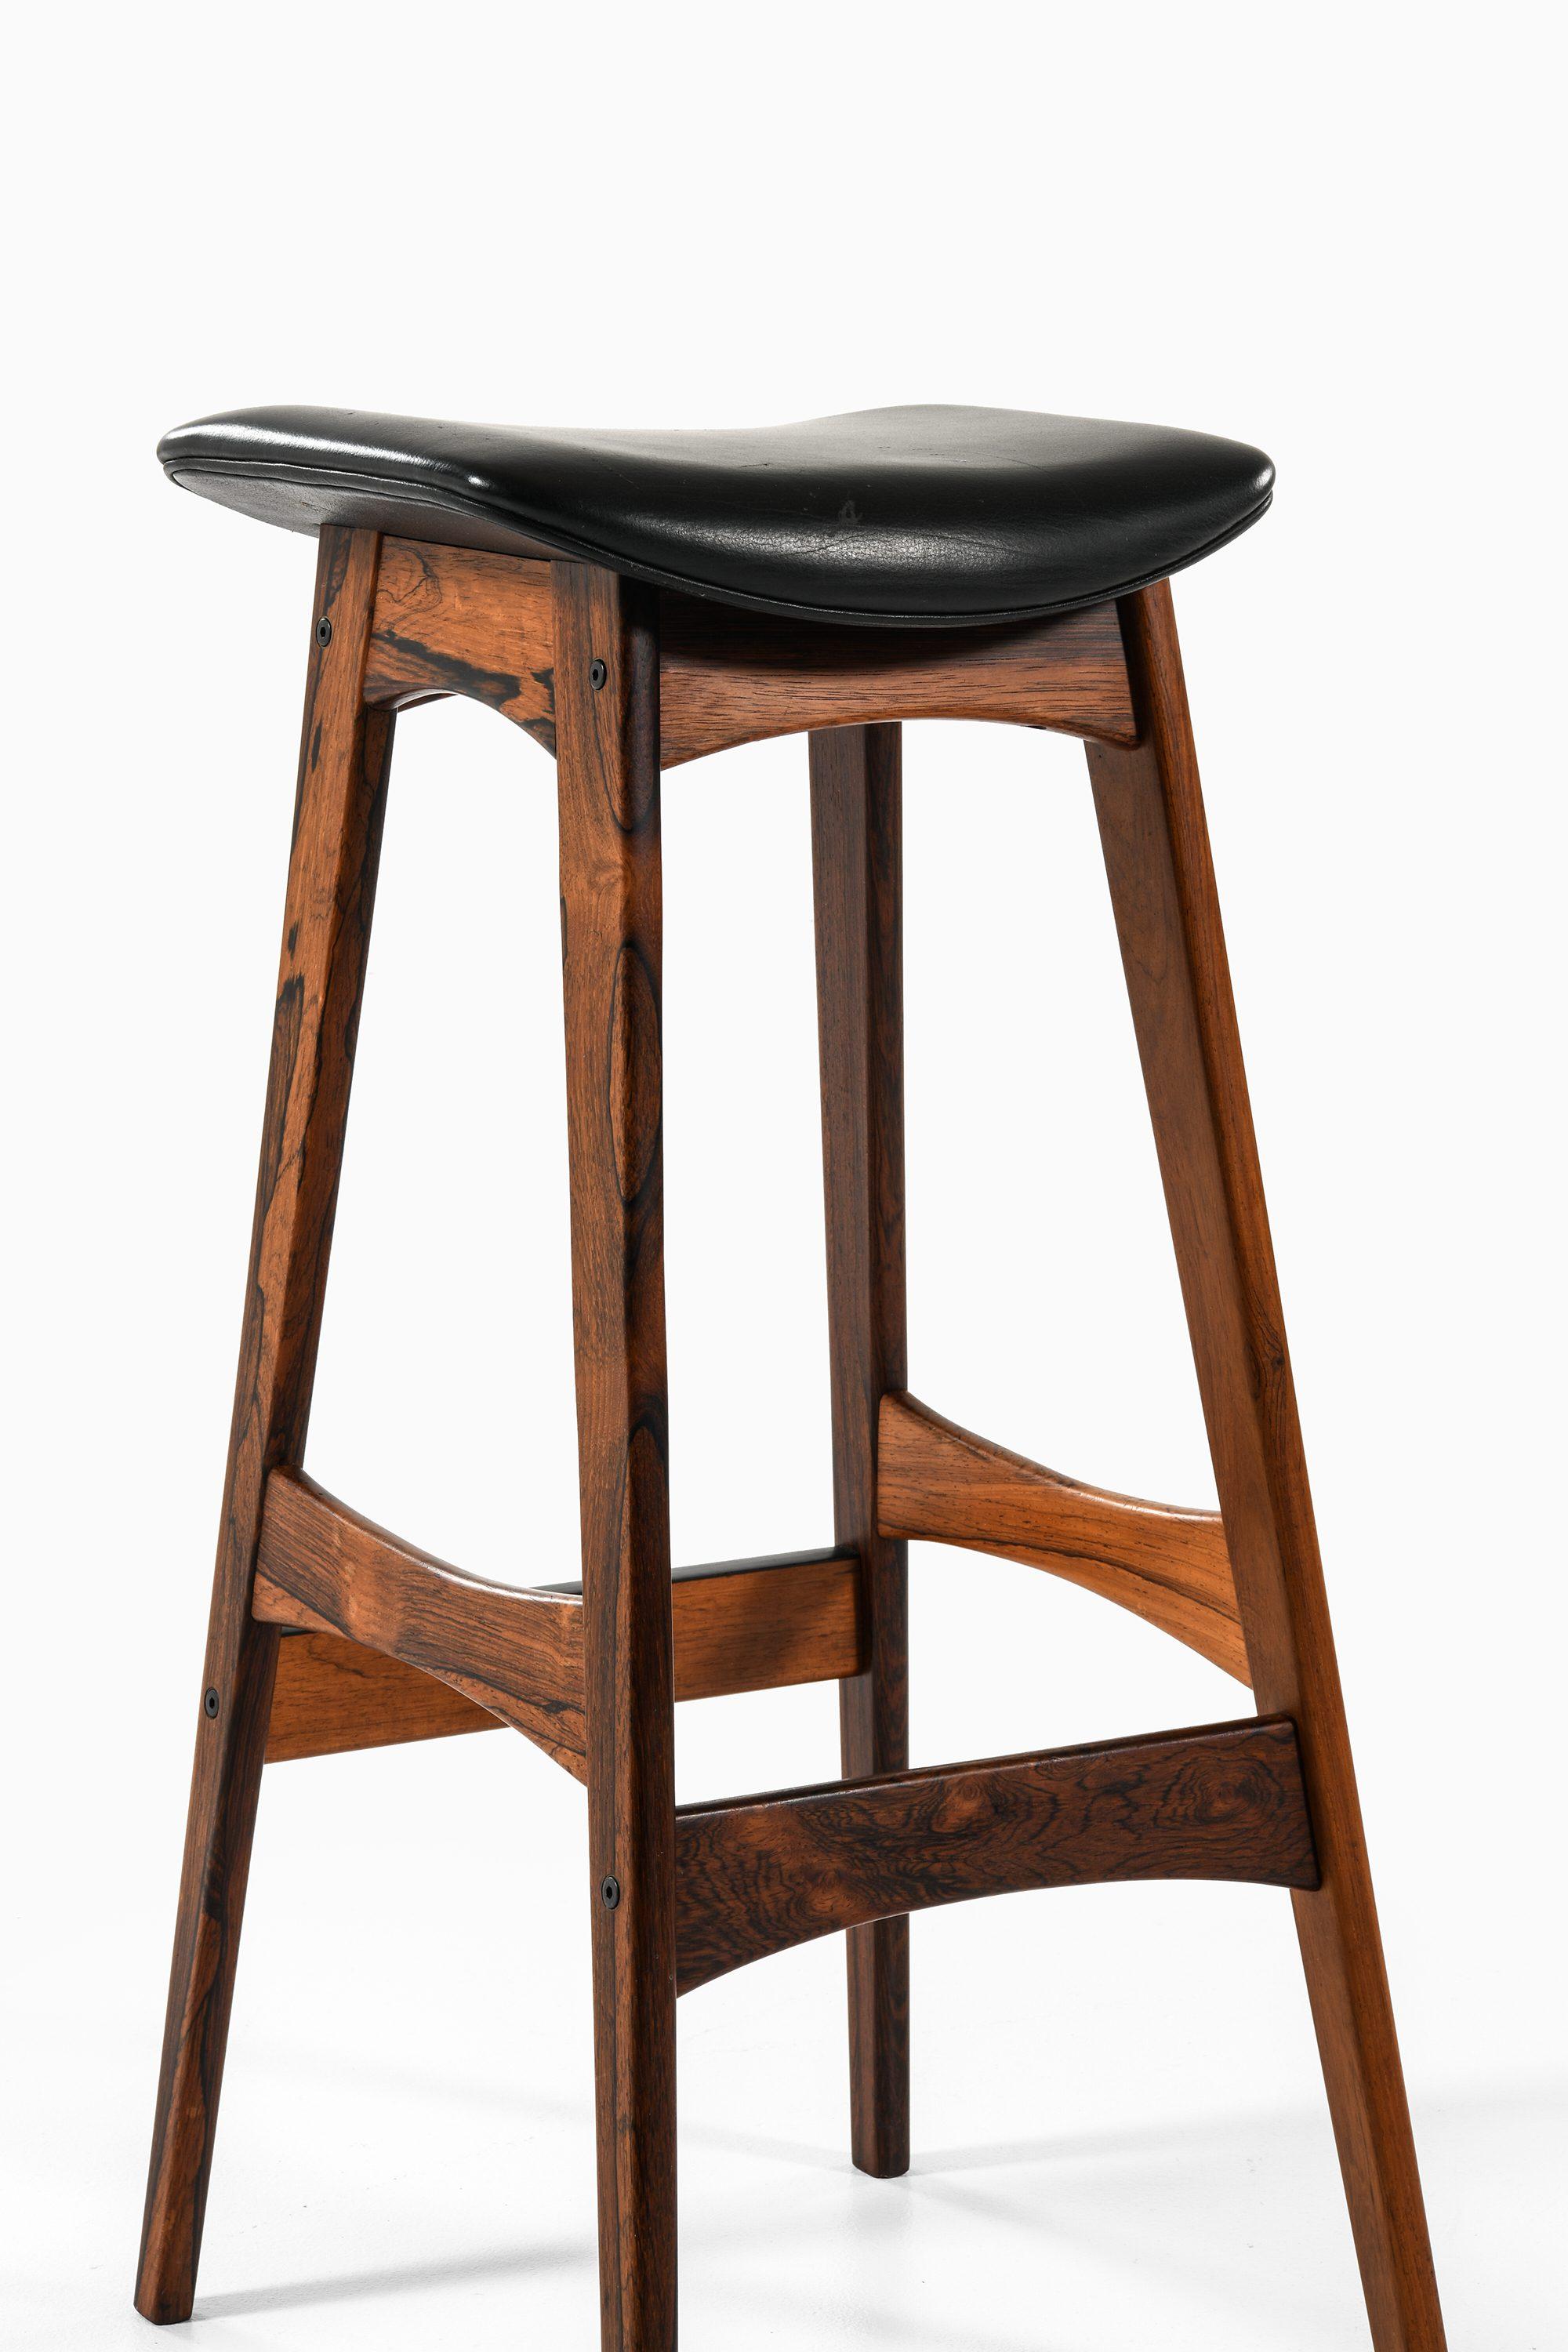 Set of 3 Bar Stools in Rosewood and Black Leather by Johannes Andersen, 1961 In Good Condition For Sale In Limhamn, Skåne län